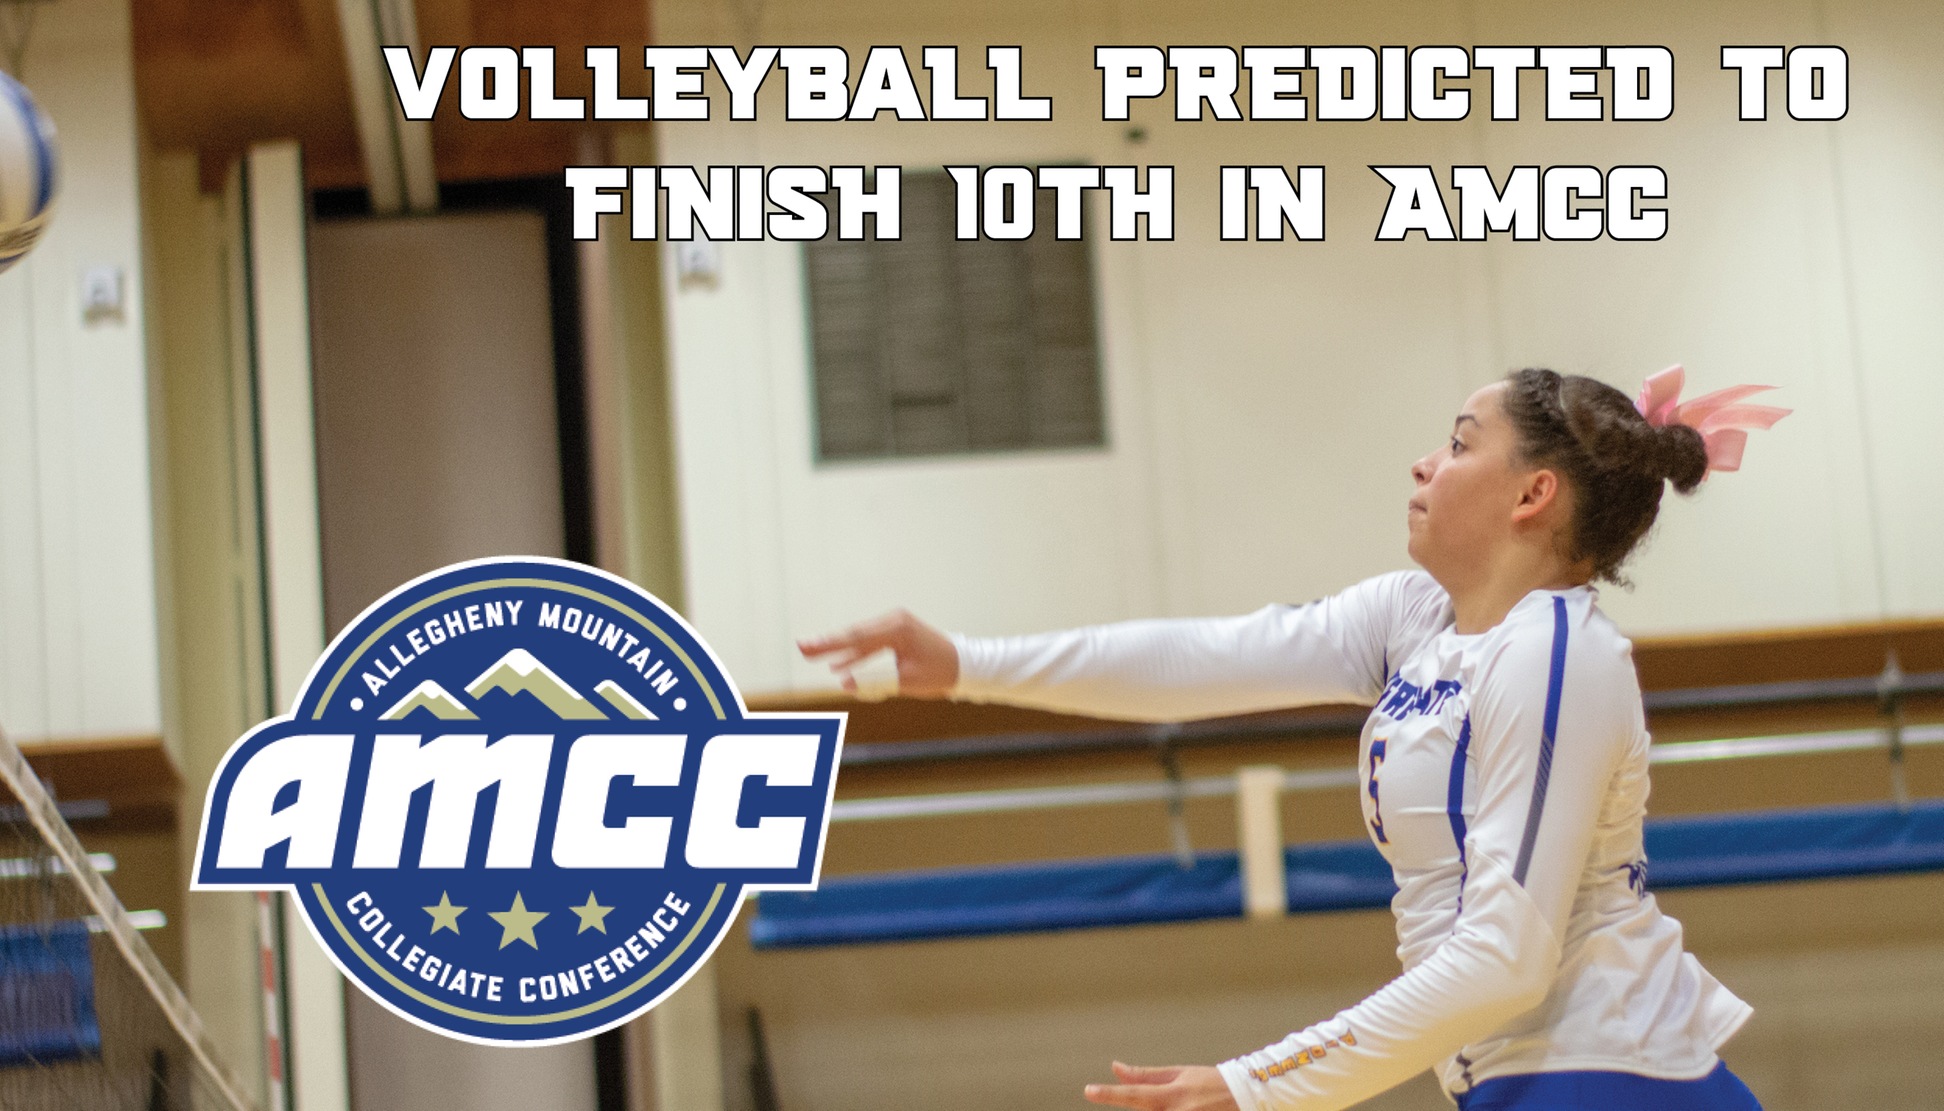 Alfred State Volleyball is predicted to finish 10th in the preseason AMCC poll. Pictured is Kiara Perkins with a kill attempt